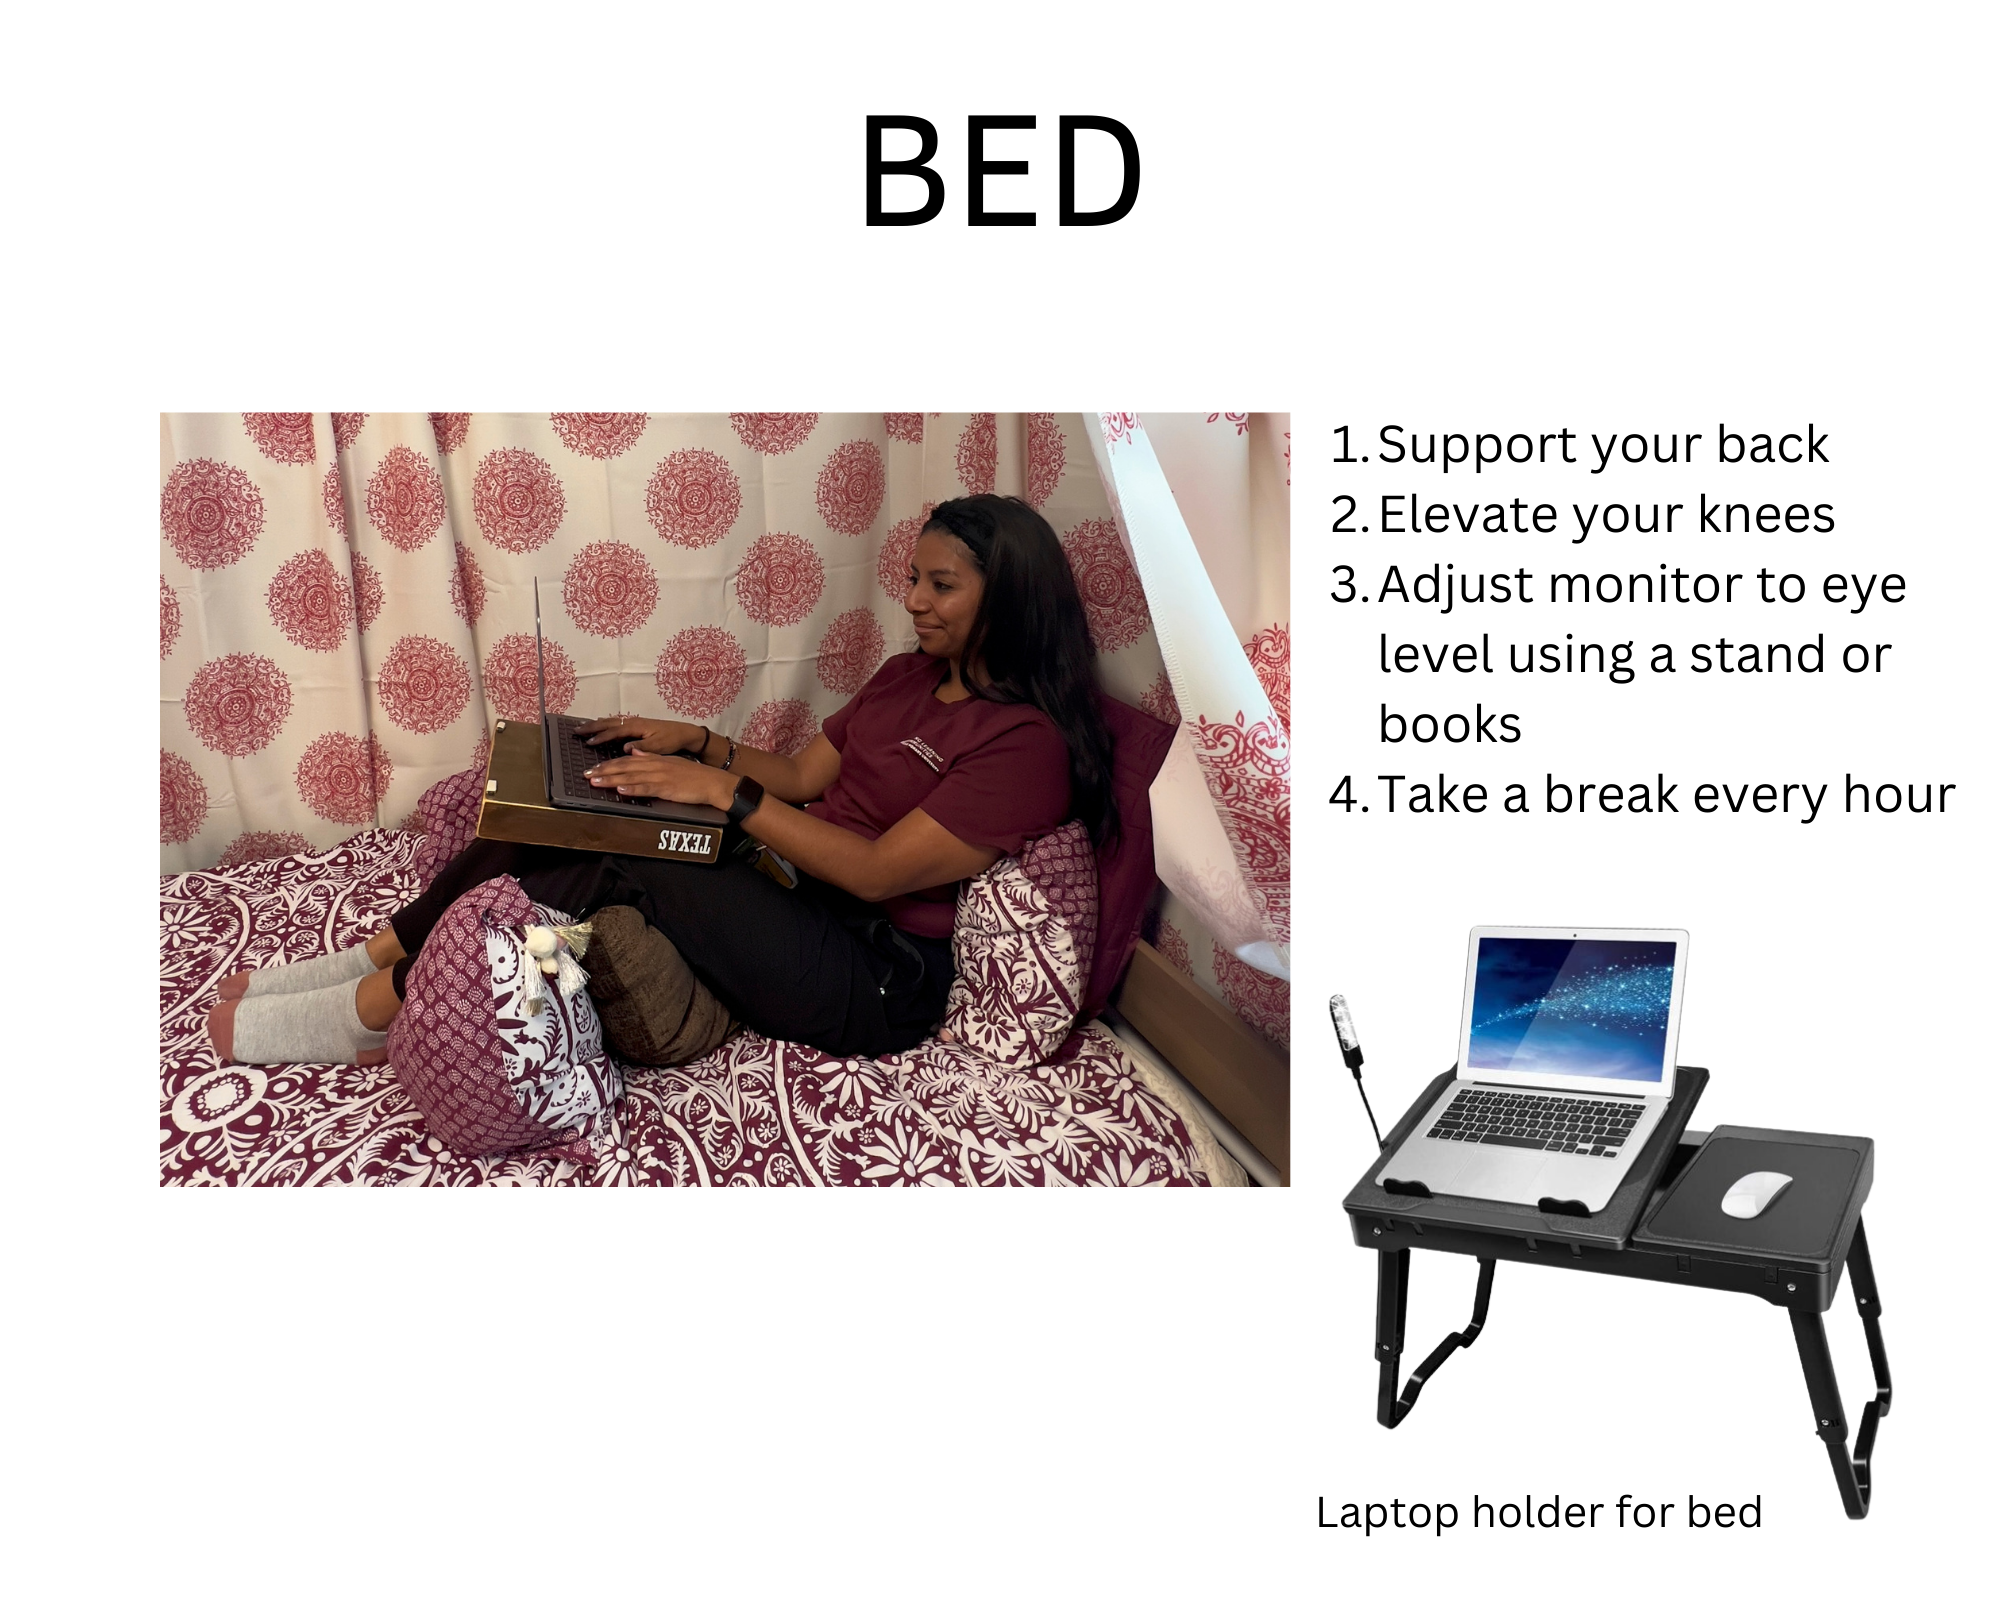 Student sitting on bed with laptop. Black text on white background: "Bed: 1. Support your back 2. Elevate your knees 3. Adjust monitor to eye level using a stand or books 4. Take a break every hour". There is a laptop holder for beds featured as an alternative product.